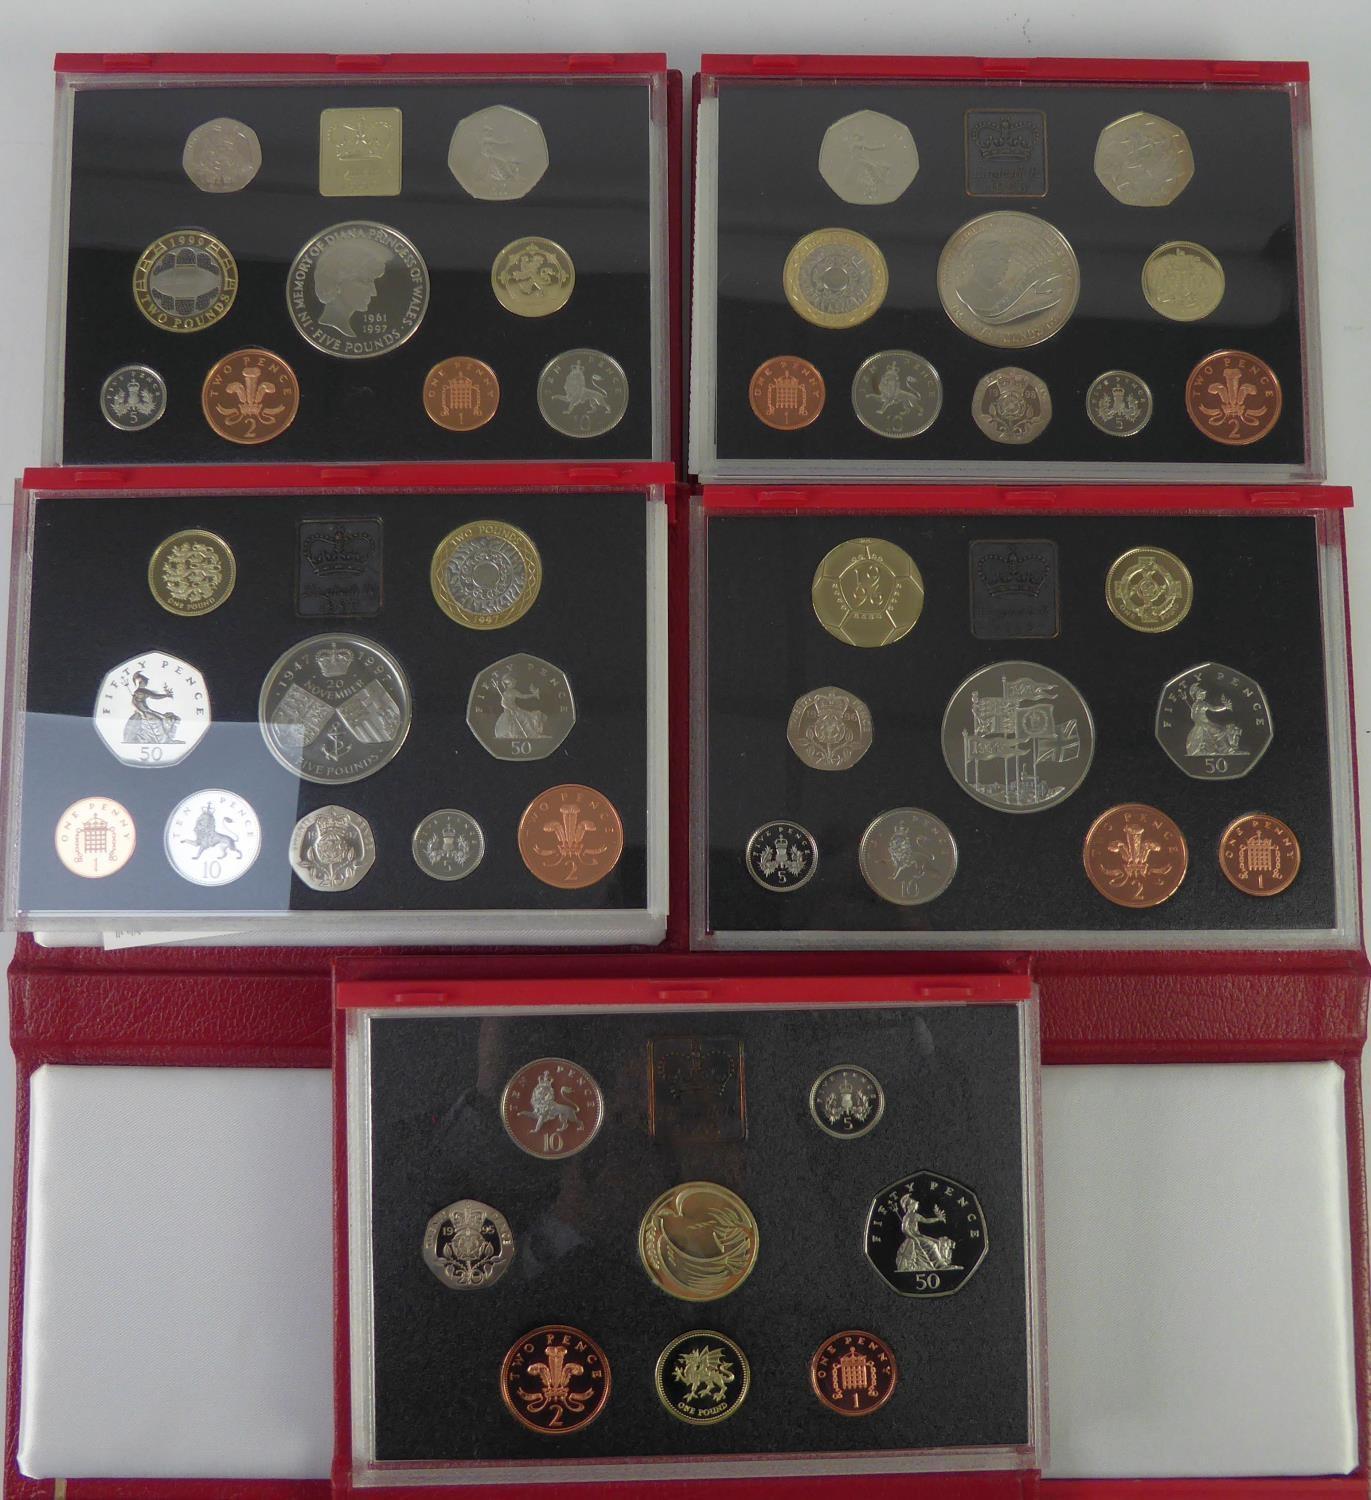 ROYAL MINT ISSUED COMMEMORATIVE COIN SETS 1990-1999, in original boxes unused (6)